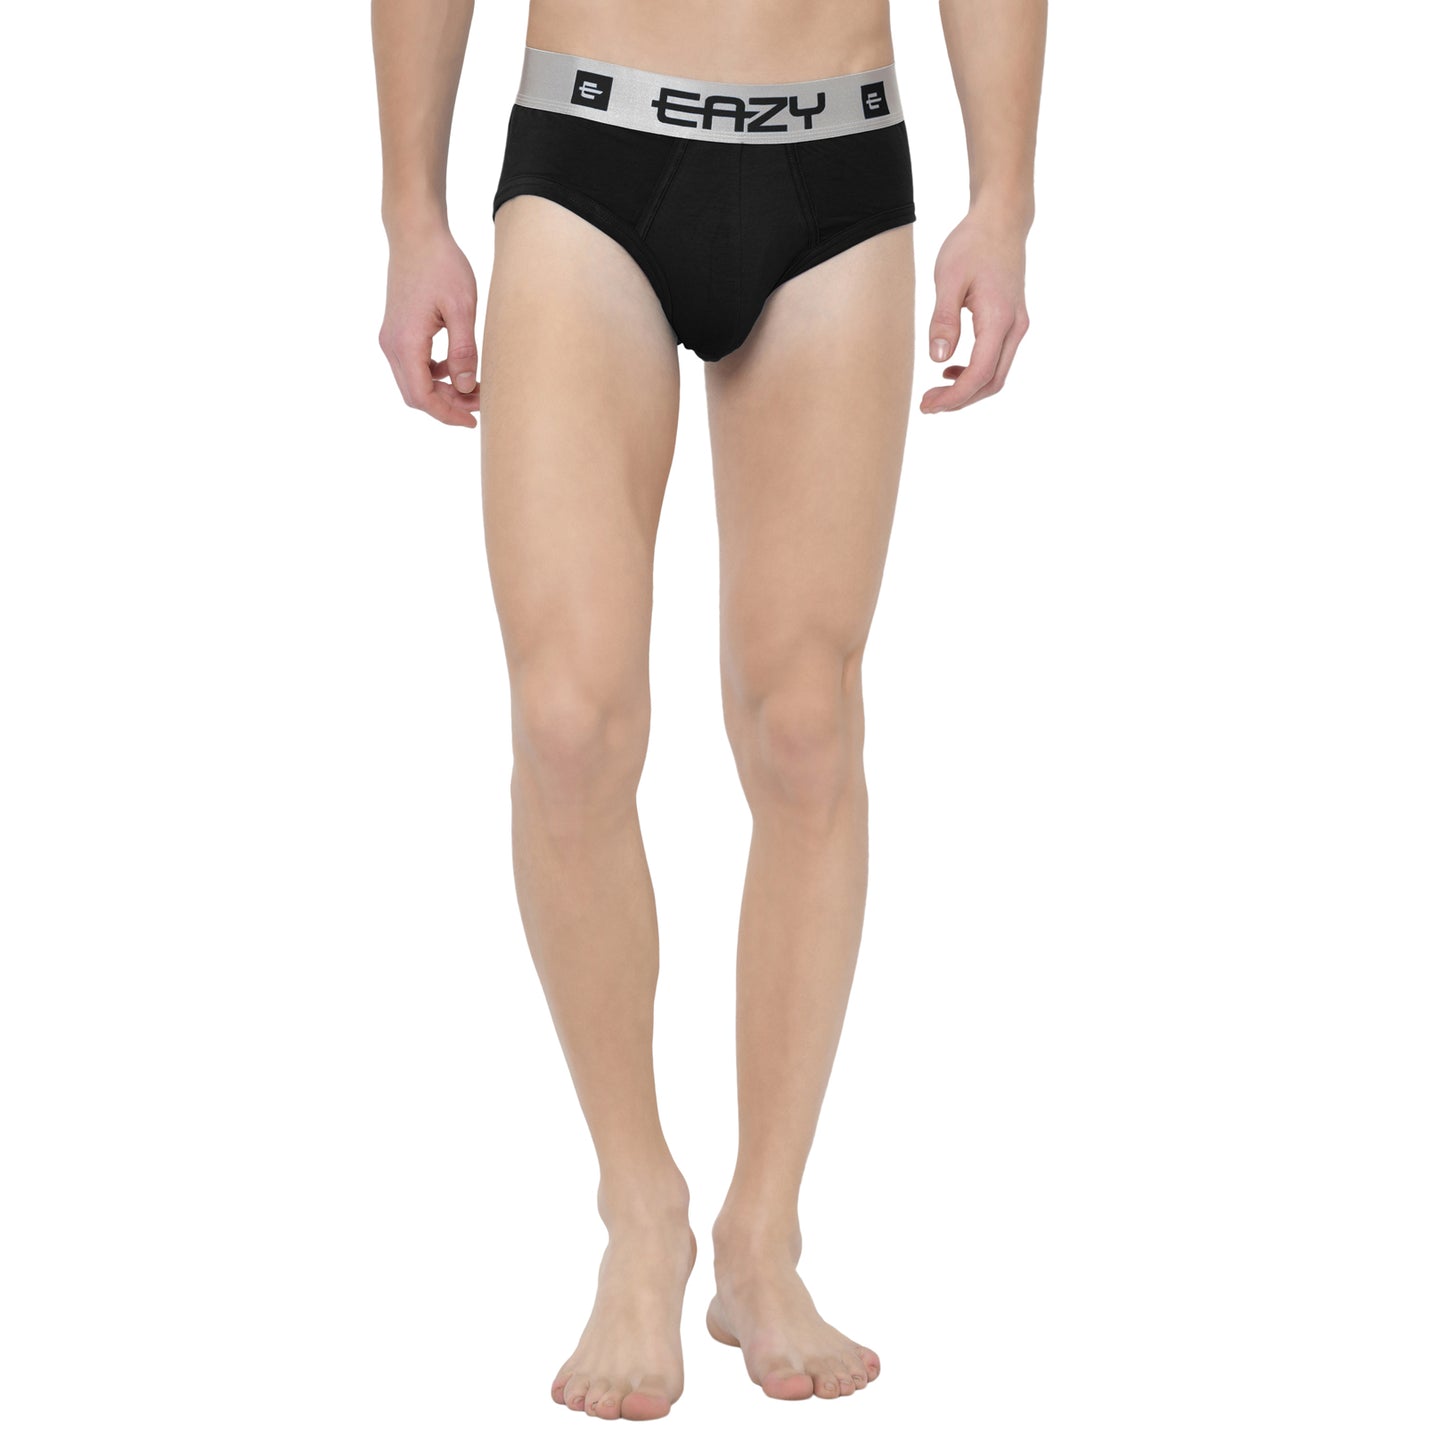 Eazy Silverline Low Rise Brief (Pack of 3)